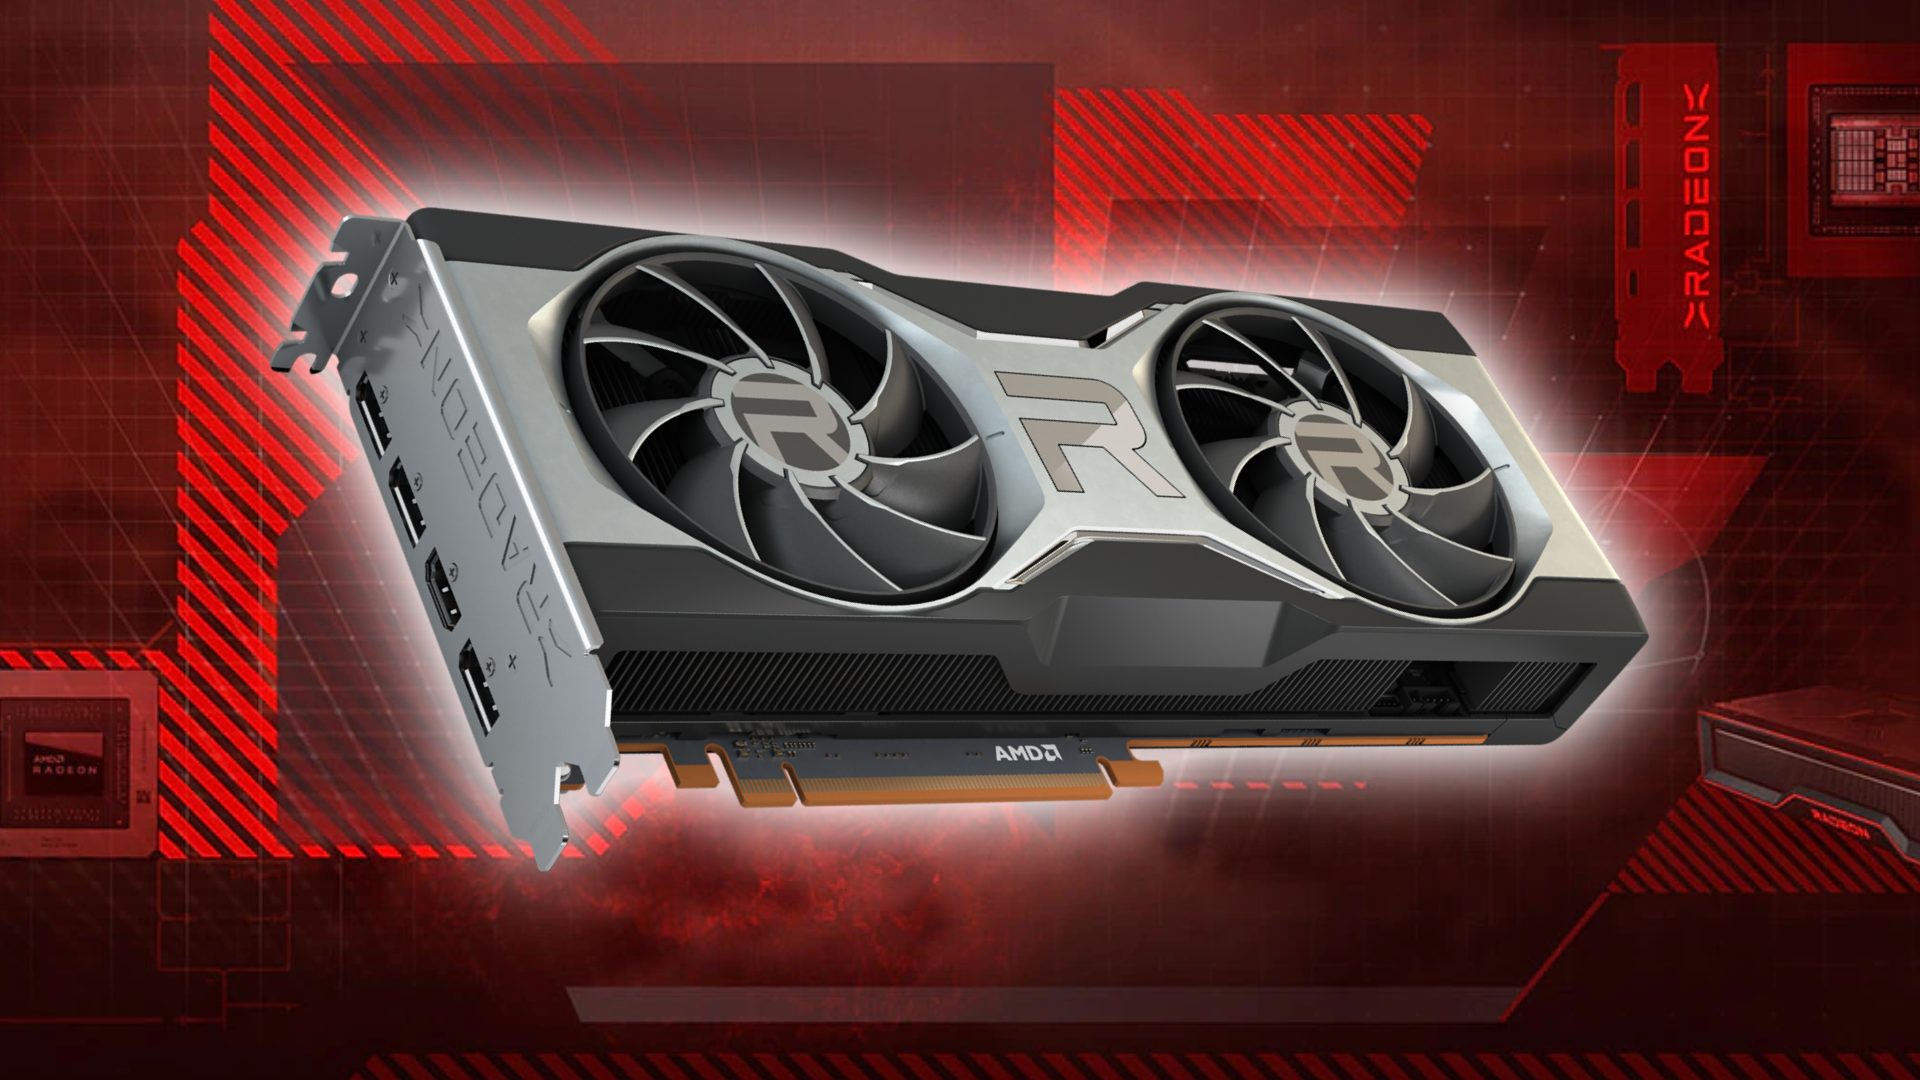 AMD Radeon RX 7900 XT: RDNA 2 graphics card with red branded backdrop